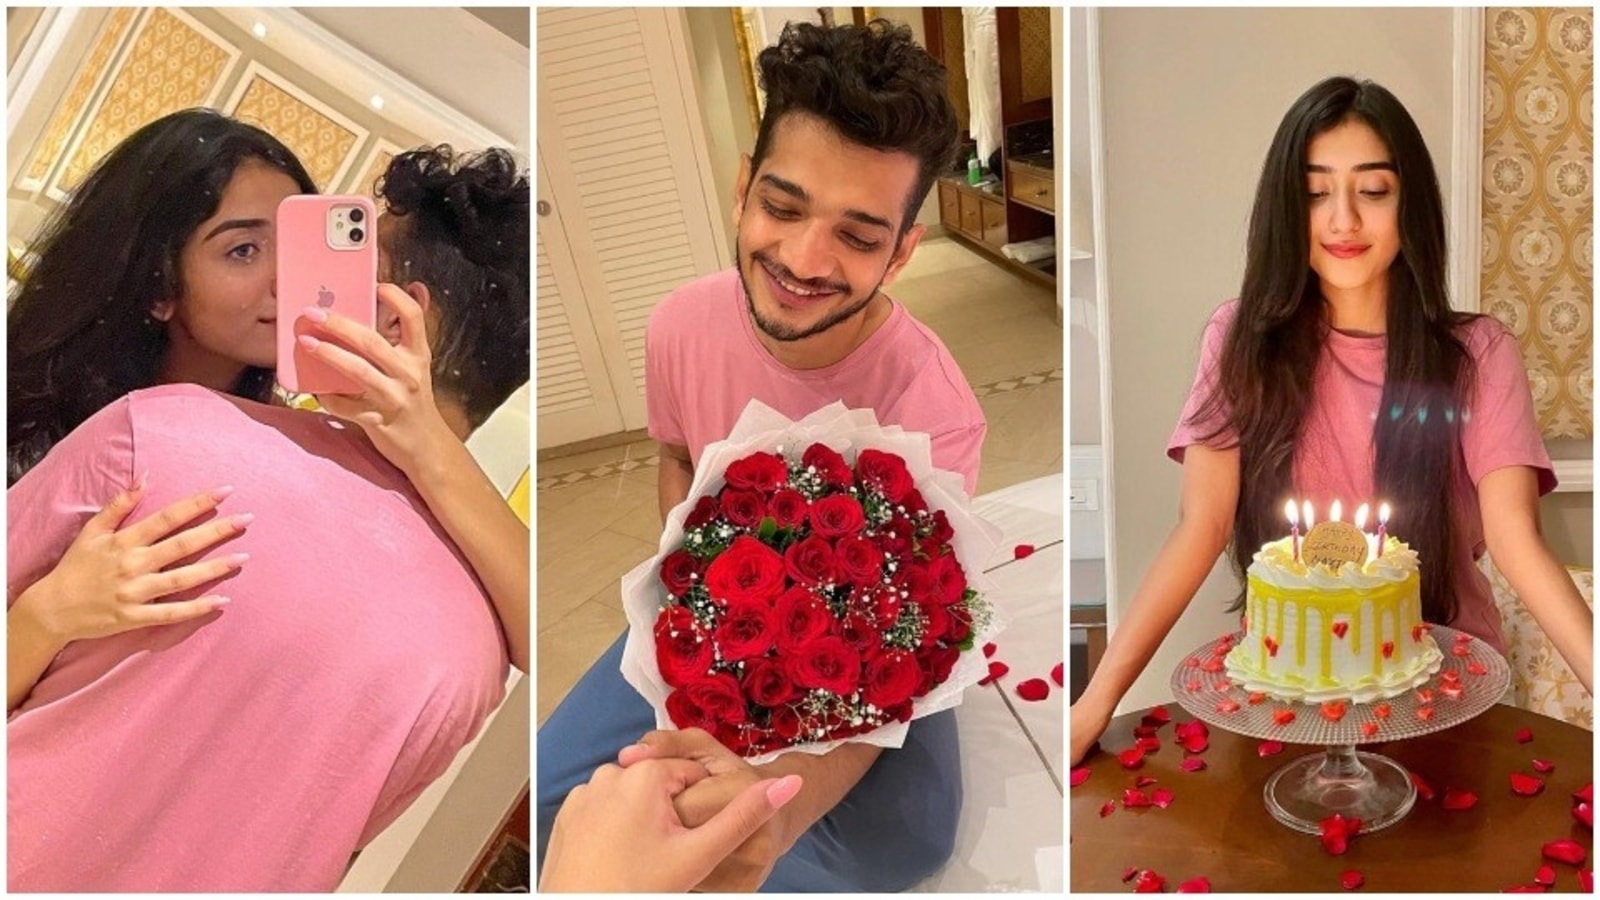 Munawar Faruqui rings in girlfriend Nazila’s birthday with roses and romance, fans notice him blushing hard